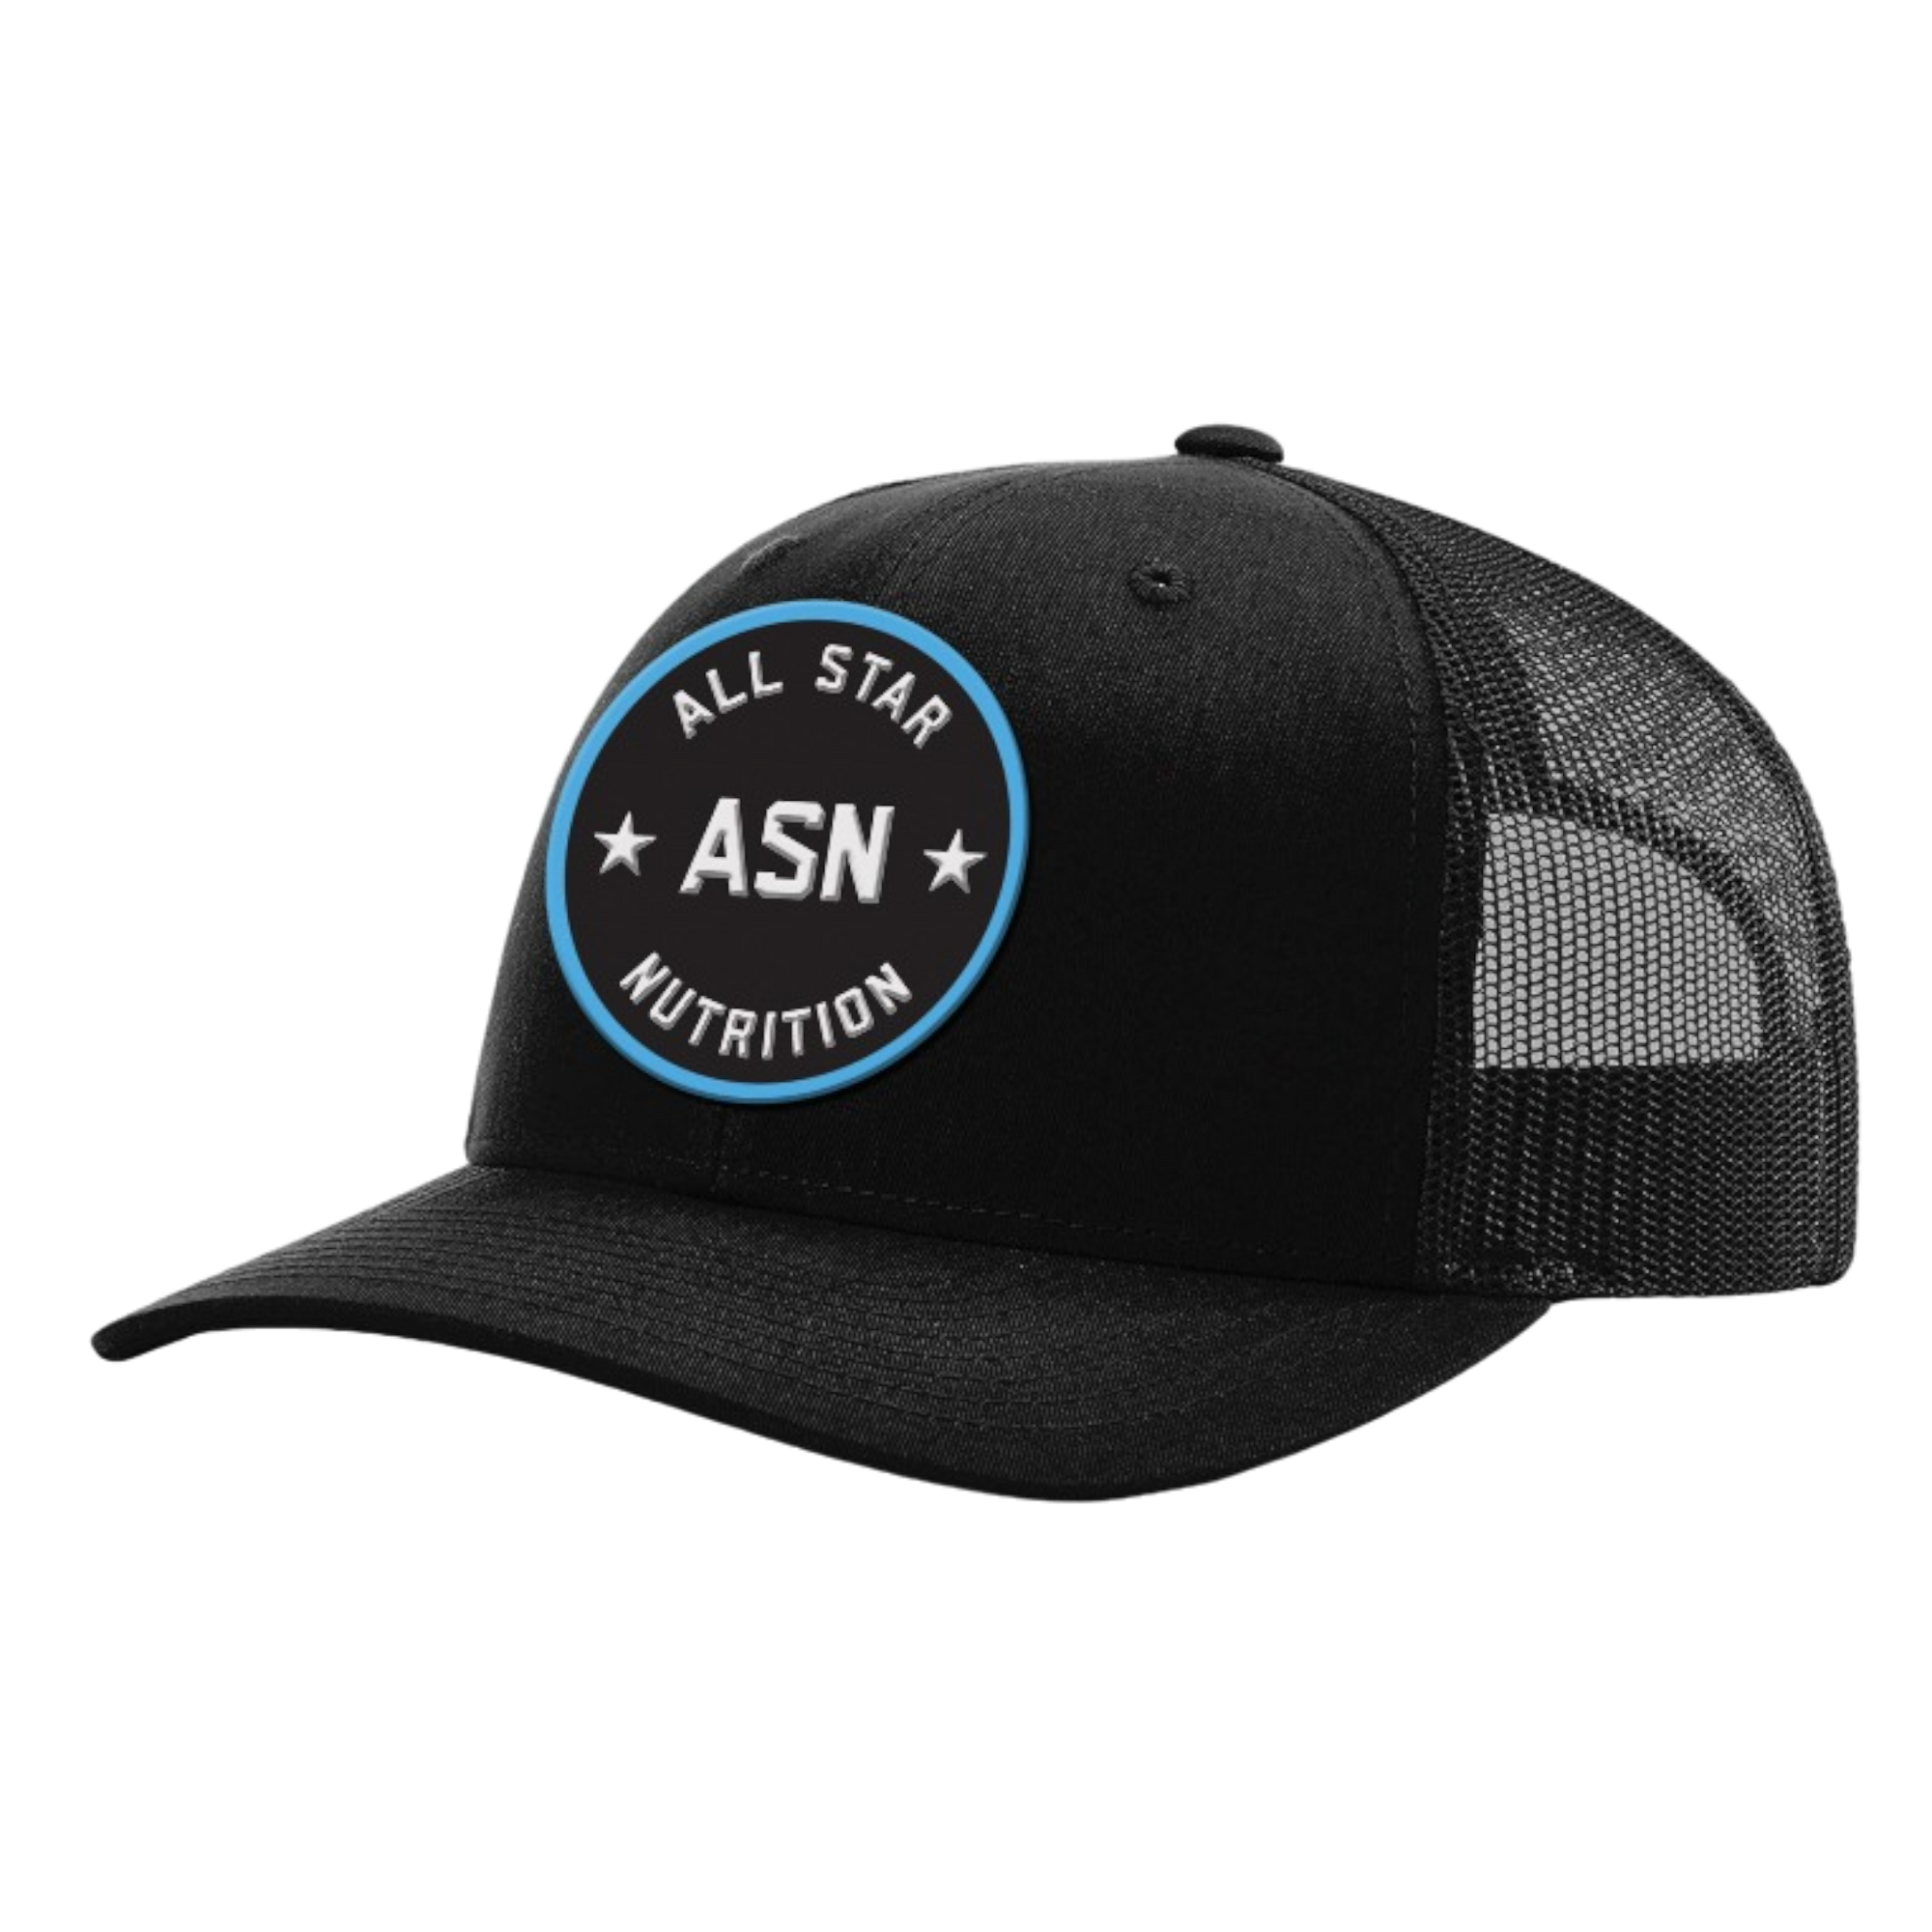 All Star Nutrition OEM Hat w/ 3d embroidery